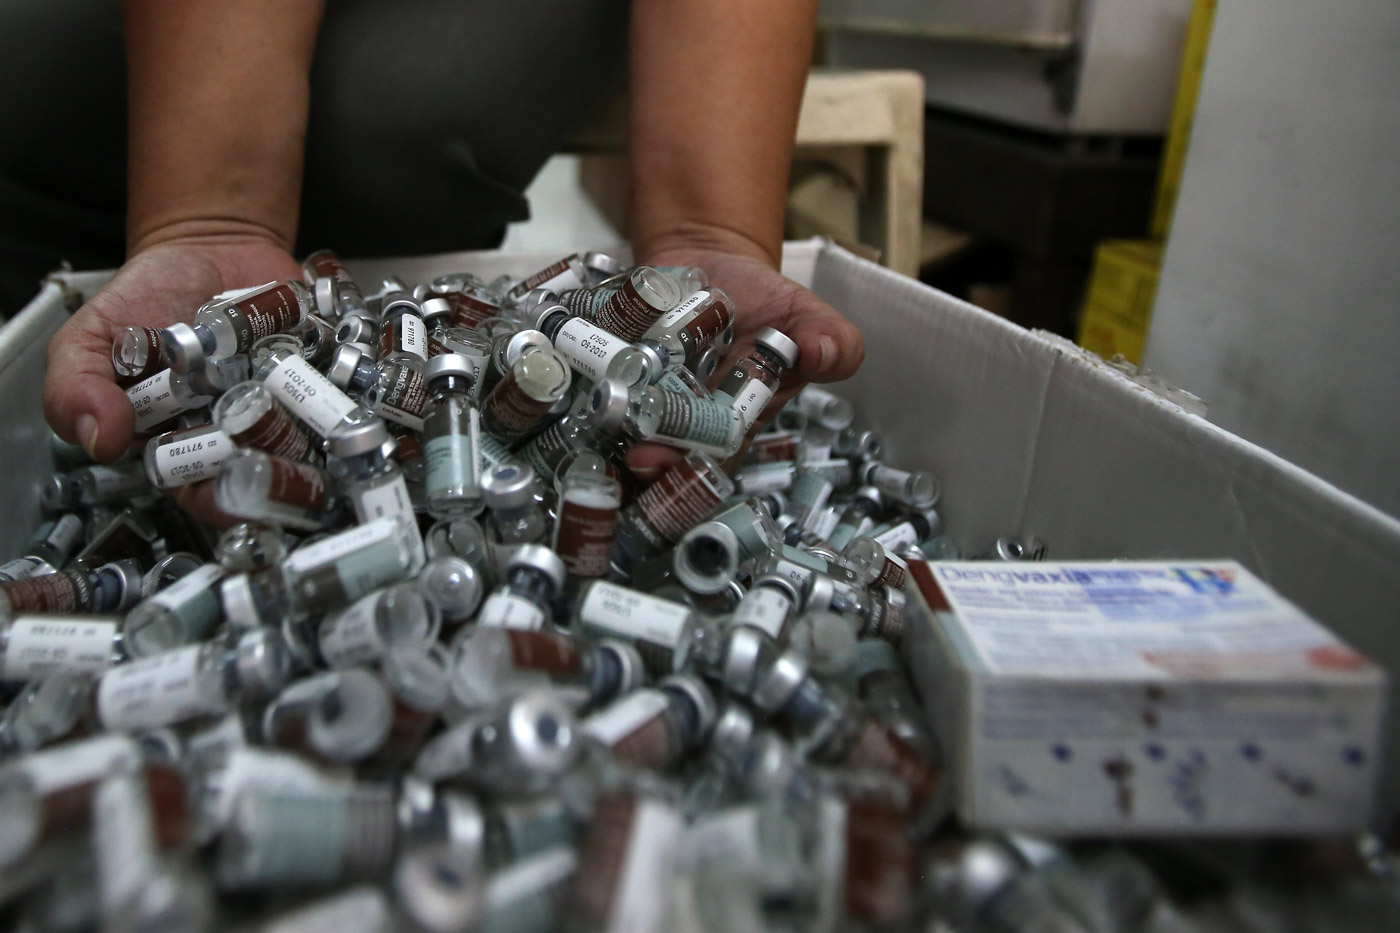 CONTROVERSIAL VACCINE. A health worker shows off used vials of Dengvaxia vaccine inside the storage facility of the local government health sector that was given to students during the school-based immunization in Manila on December 4, 2017. Photo by Ben Nabong/Rappler 